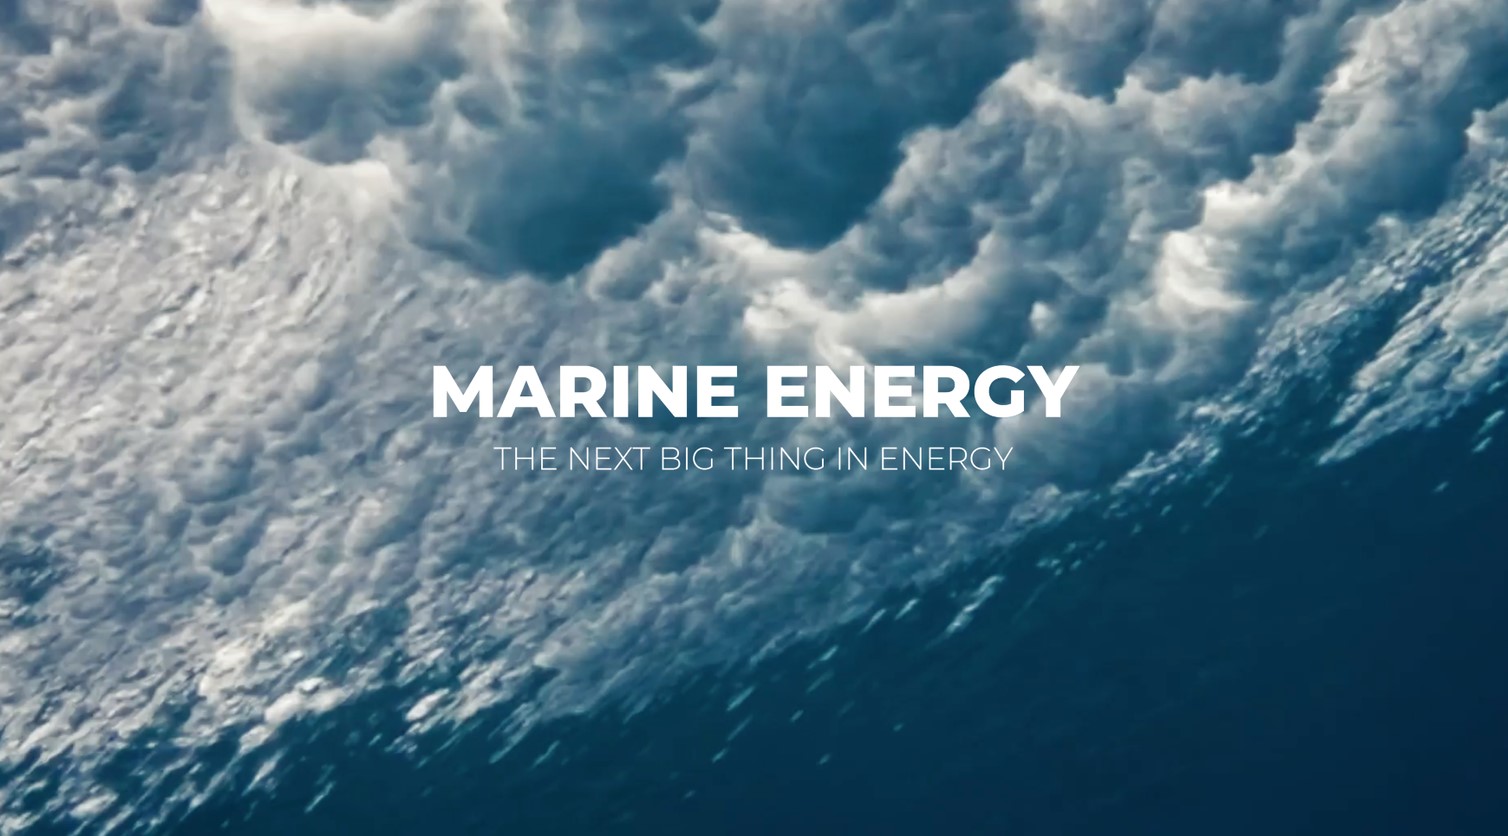 Marine Energy: The next big thing in energy